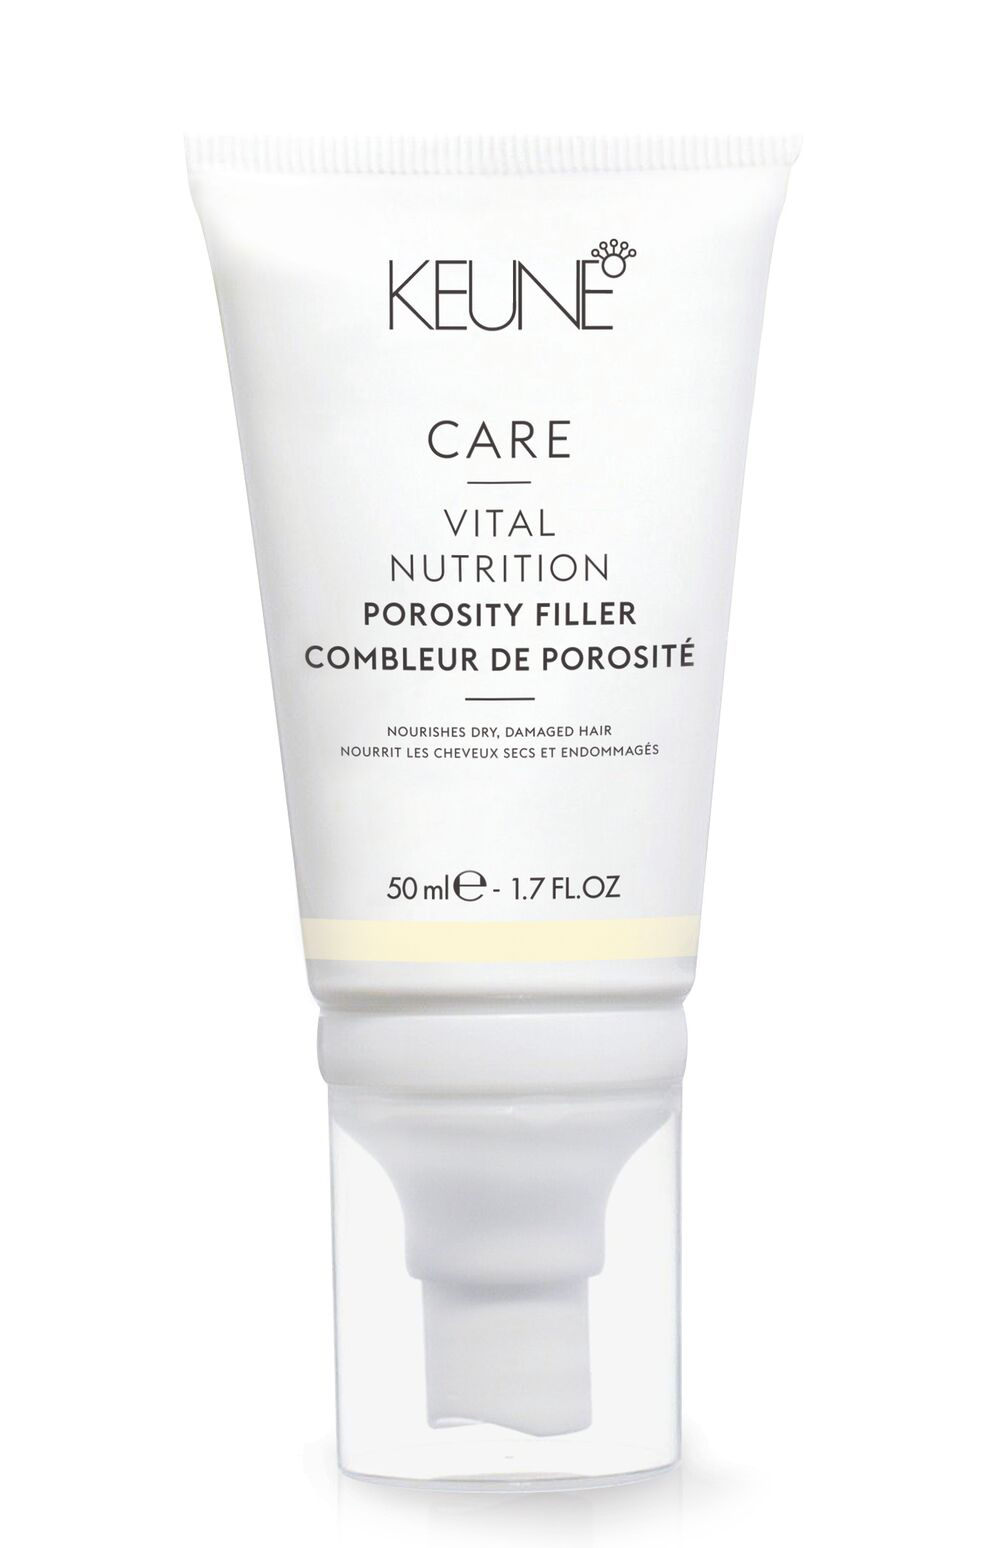 Feed dull and dry hair, strengthen thin hair with CARE VITAL NUTRITION POROSITY FILLER. Easy to apply for immediate repair and shine. Now available on keune.ch!